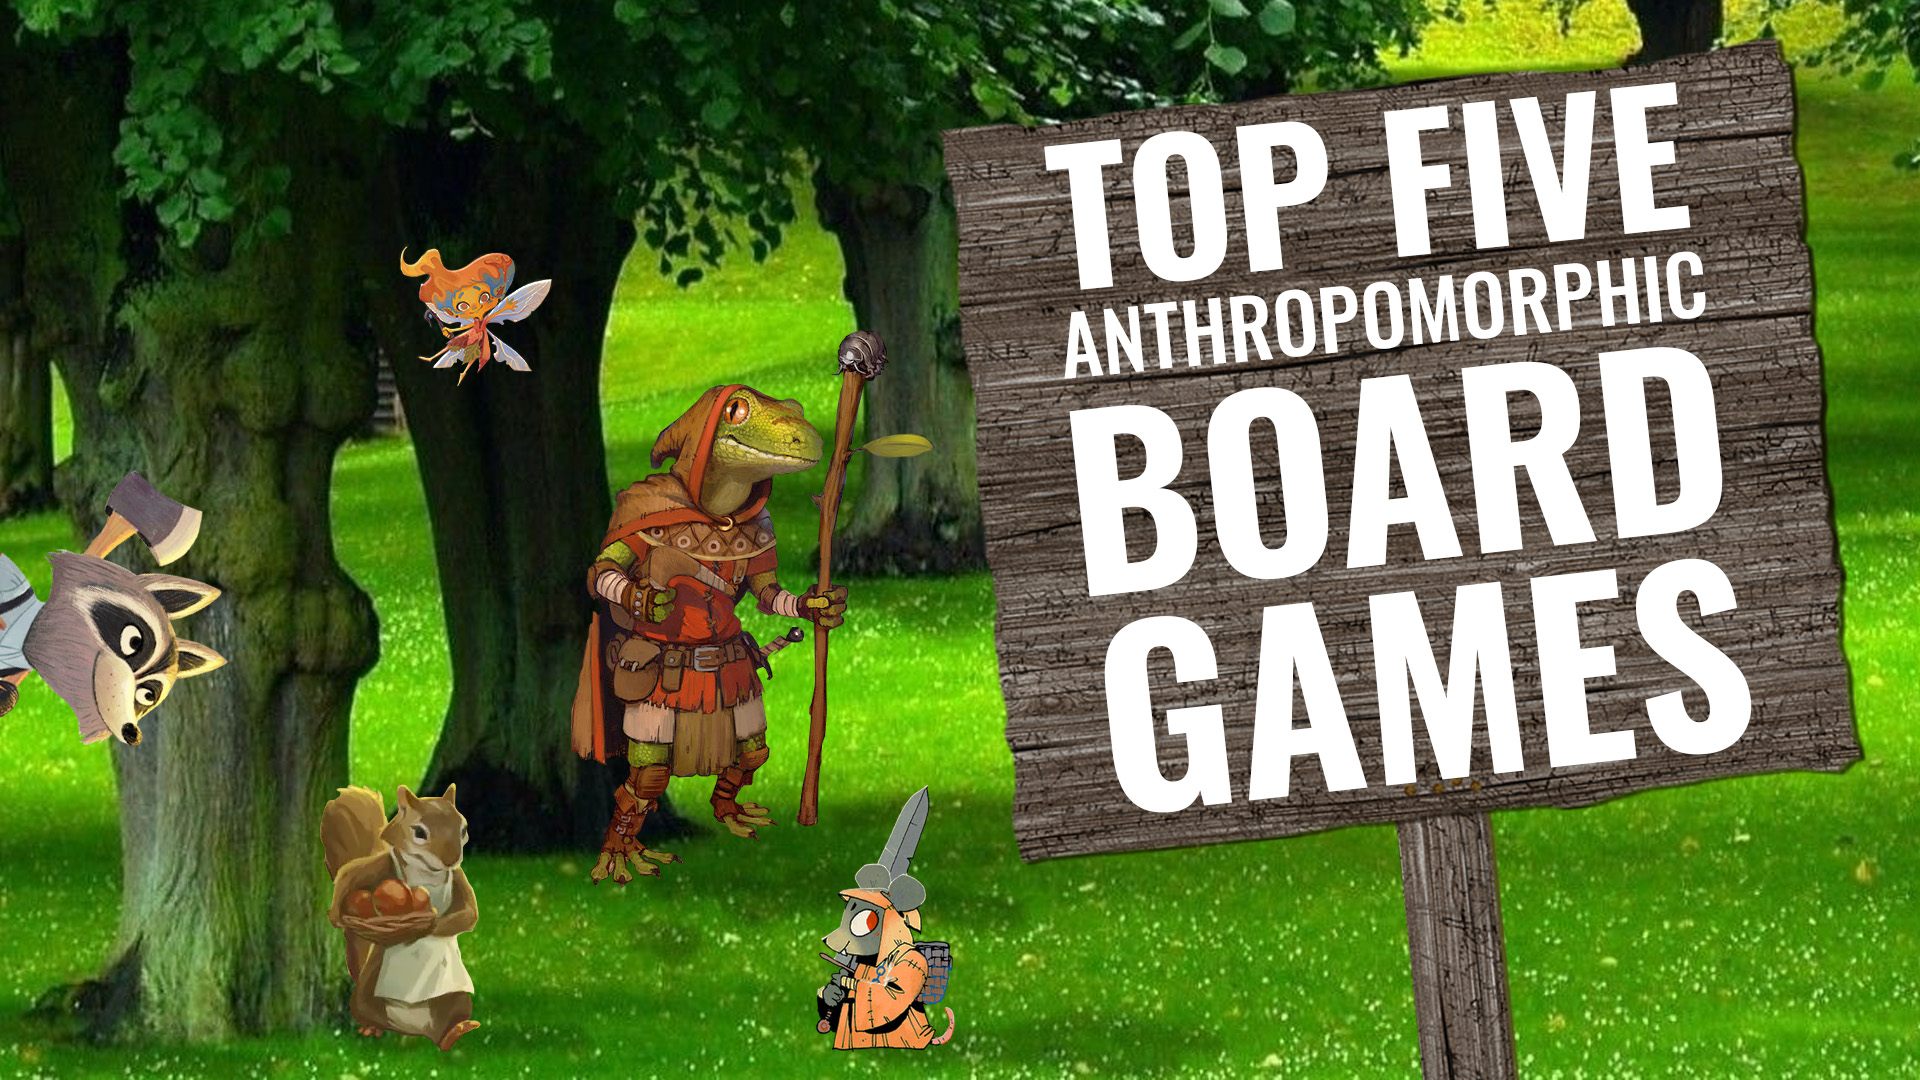 Top Five Anthropomorphic Board Games - Featured Image